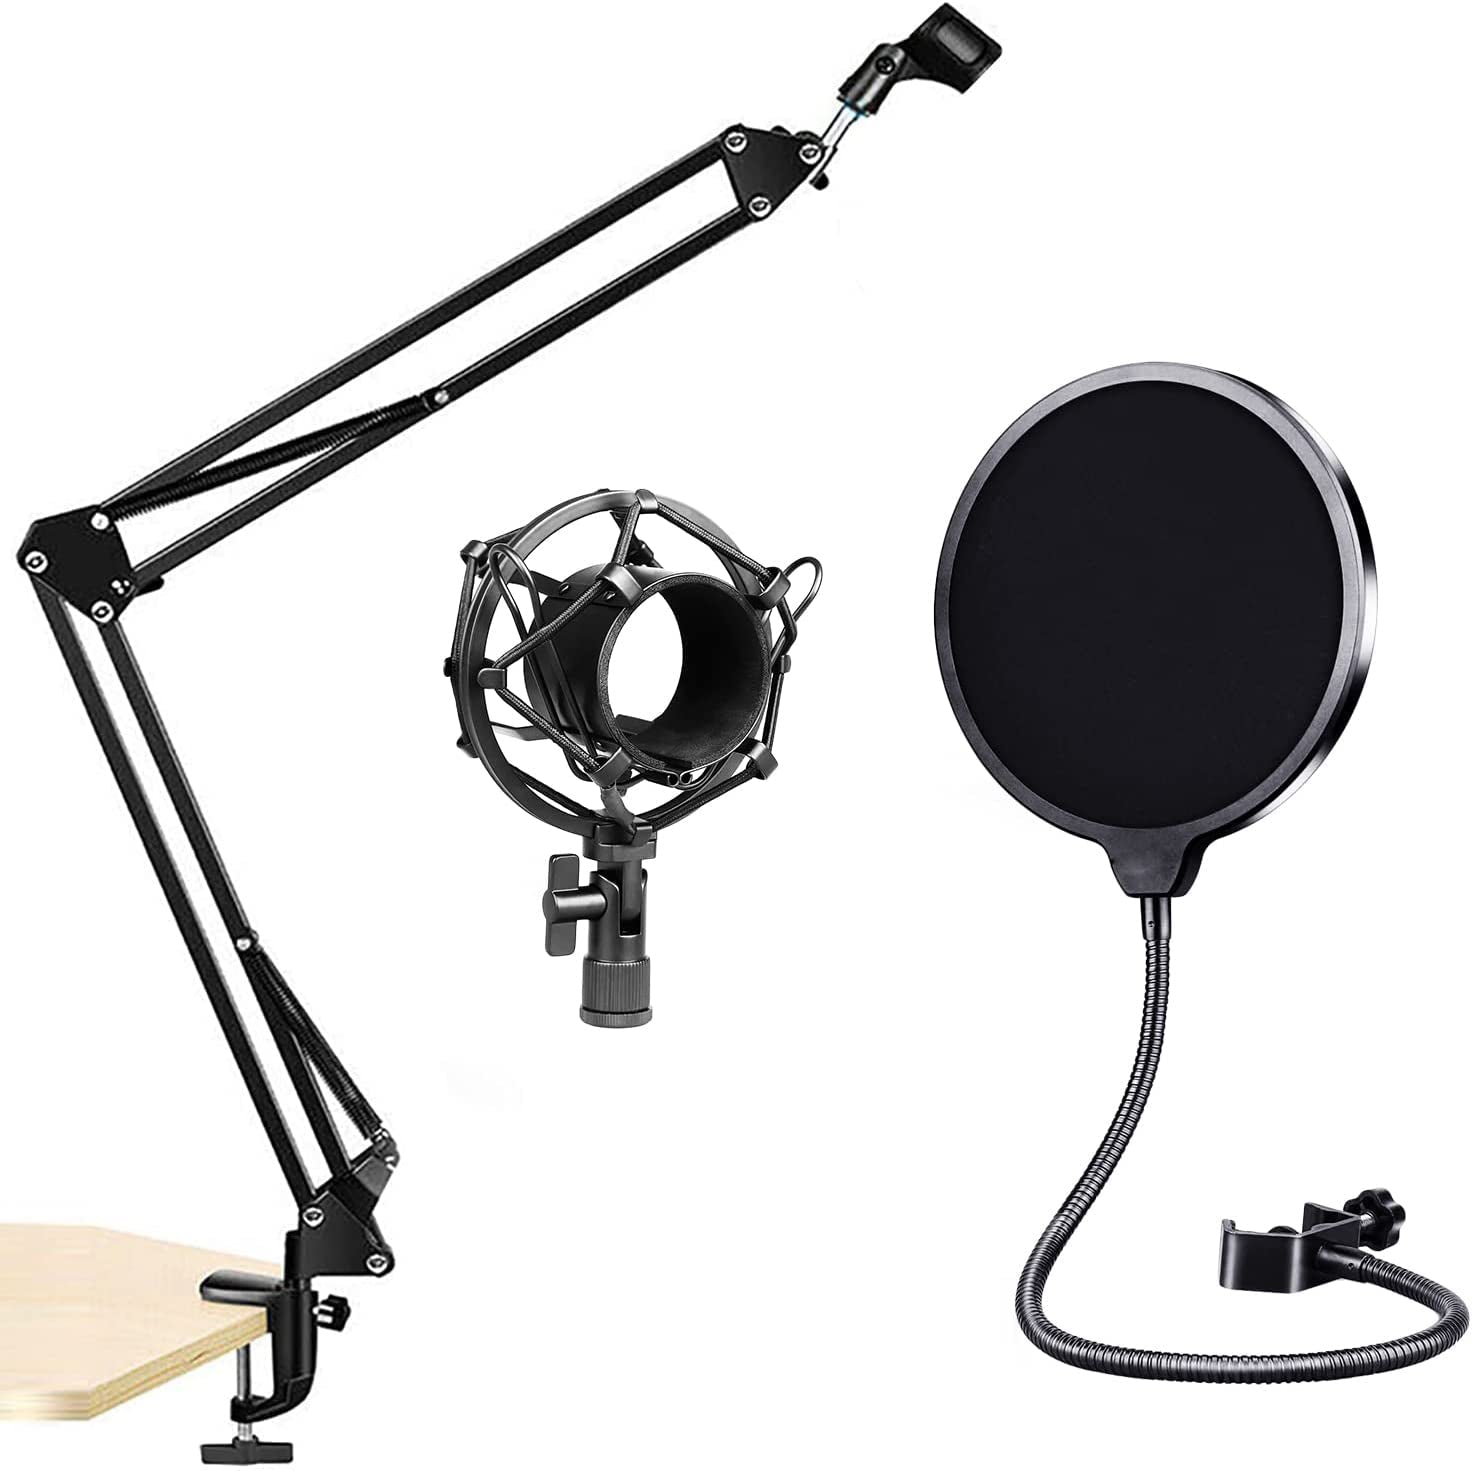 5 Core Microphone Stand Adjustable Suspension Boom Scissor Arm Mic Stand with 3/8/''to 5/8/'' Screw Adapter w Pop Filter Shock Mount - RM STND 3 P